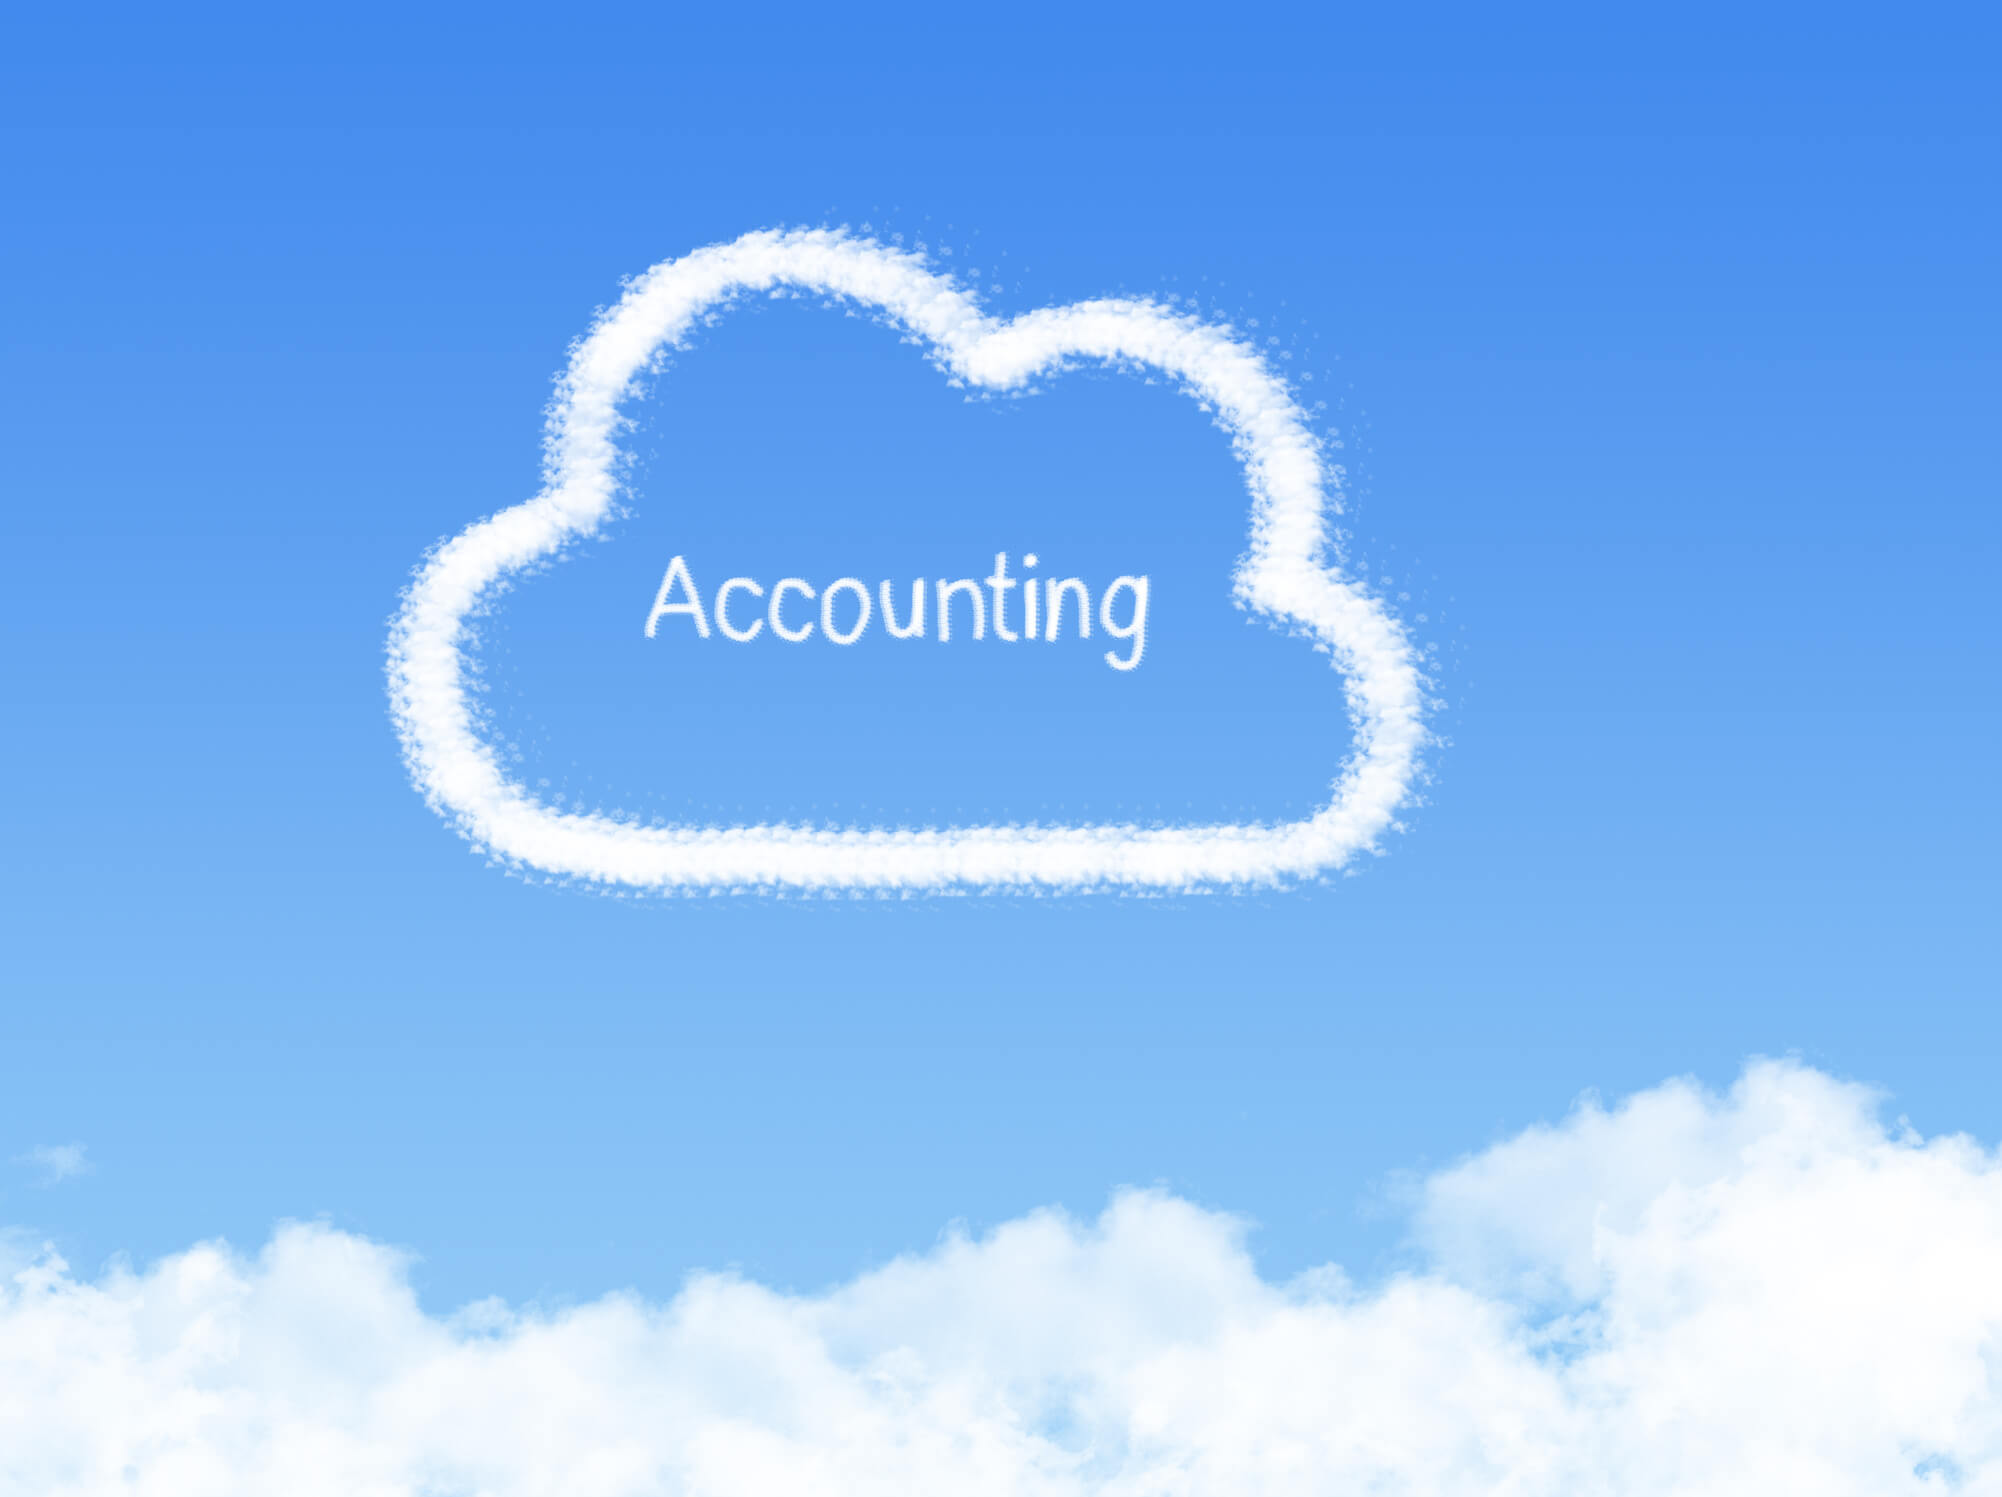 cloud-based accounting - Complete Controller